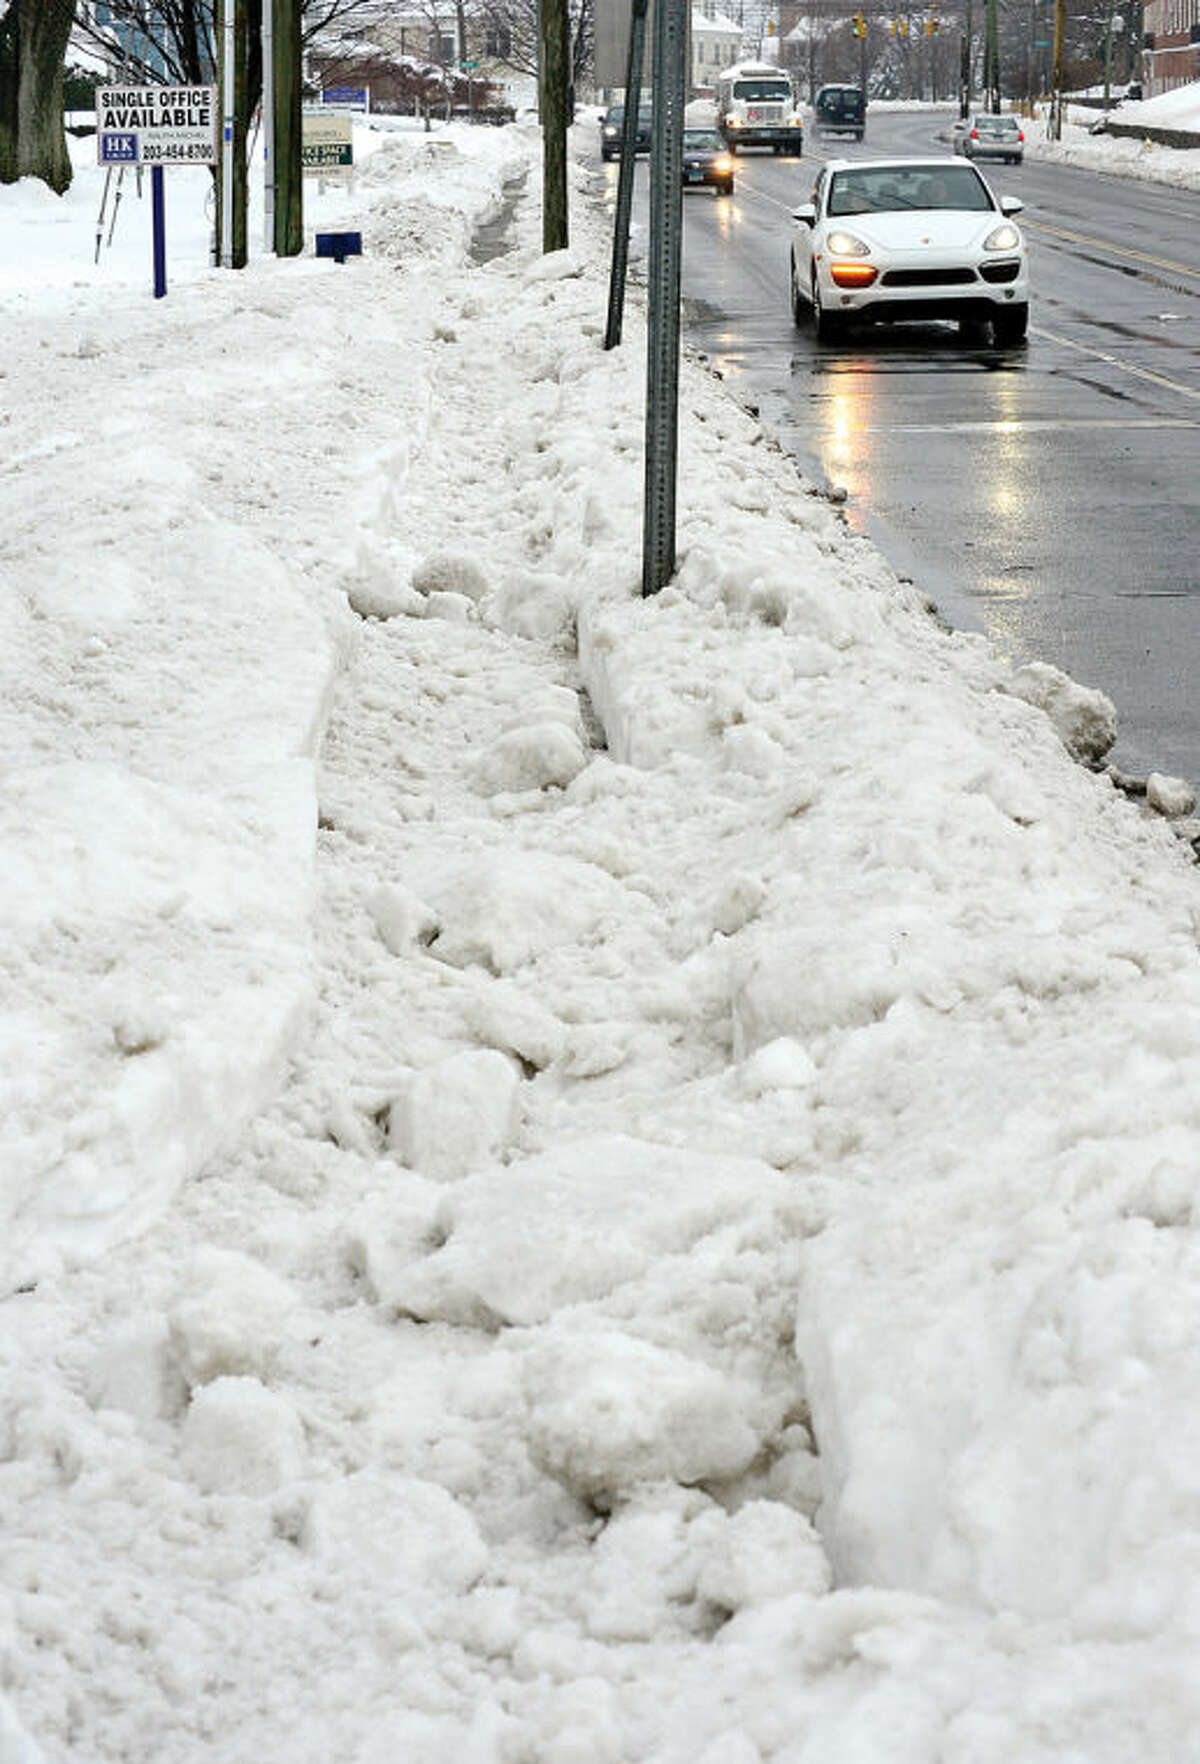 Hour photo / Erik Trautmann Once clear sidewalks on East Ave have been plowed over following the winter storm that left 5 inches of wet snow Wednesday morning.